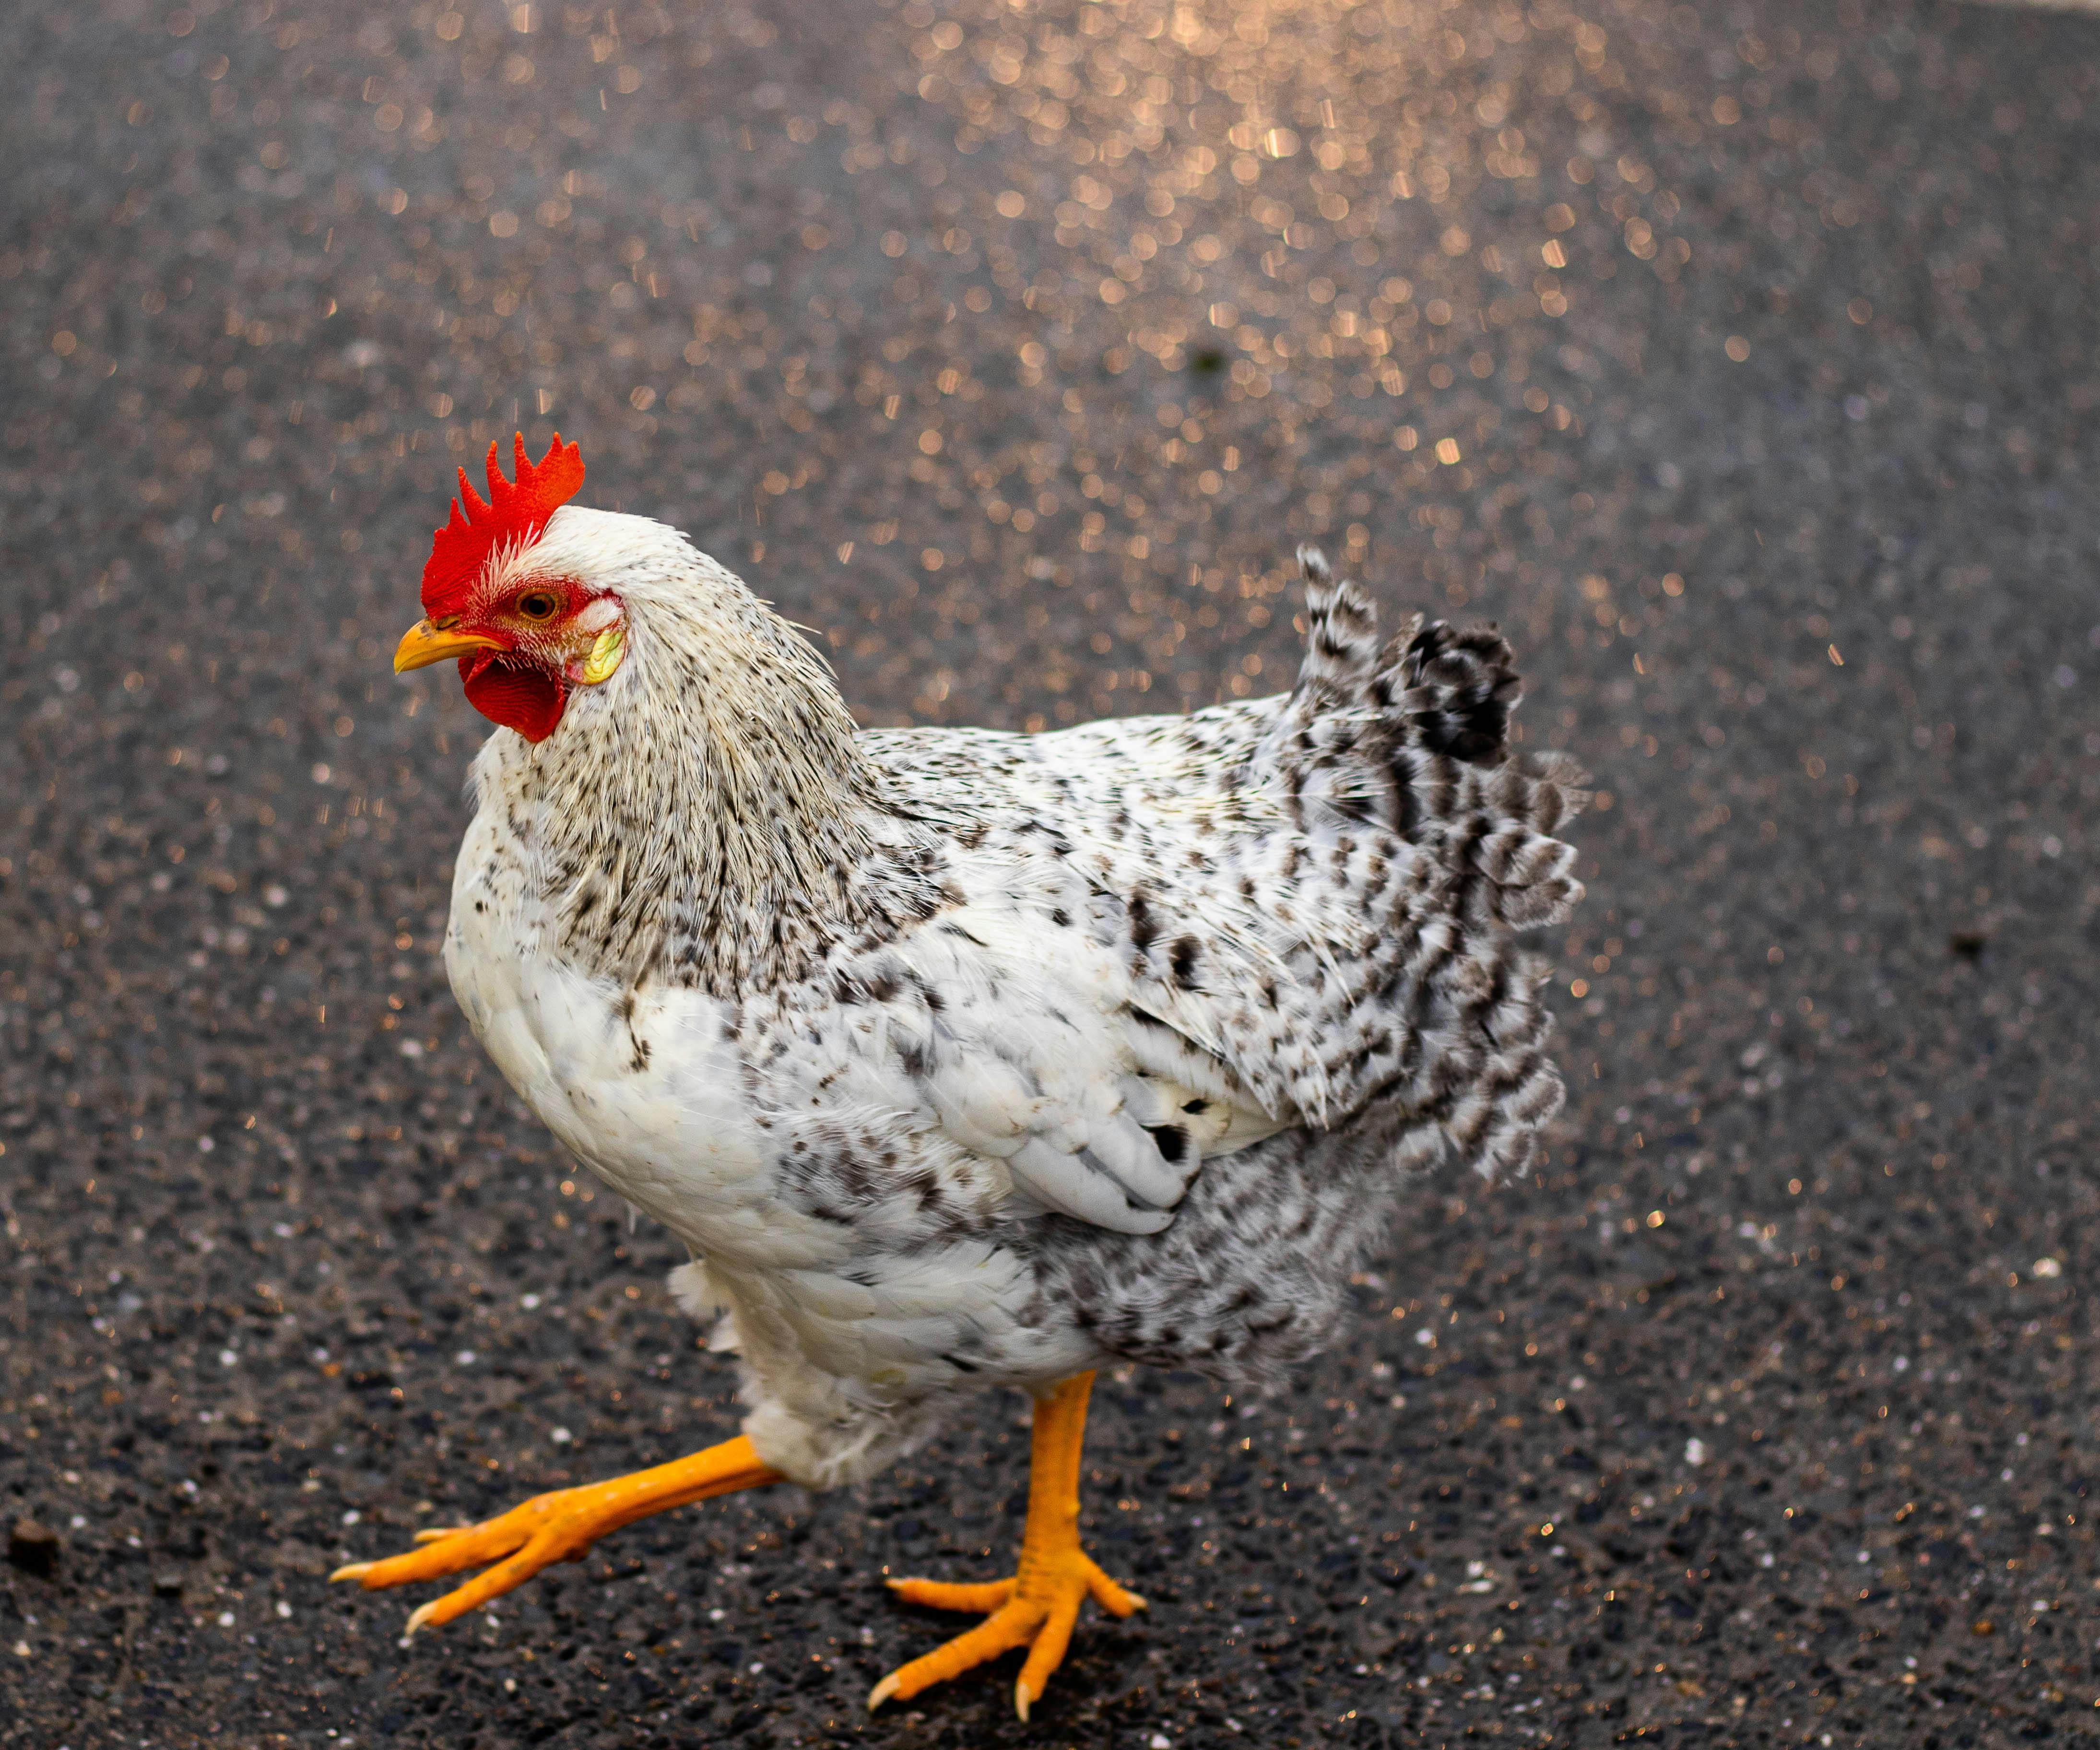 Hen Photos and Images